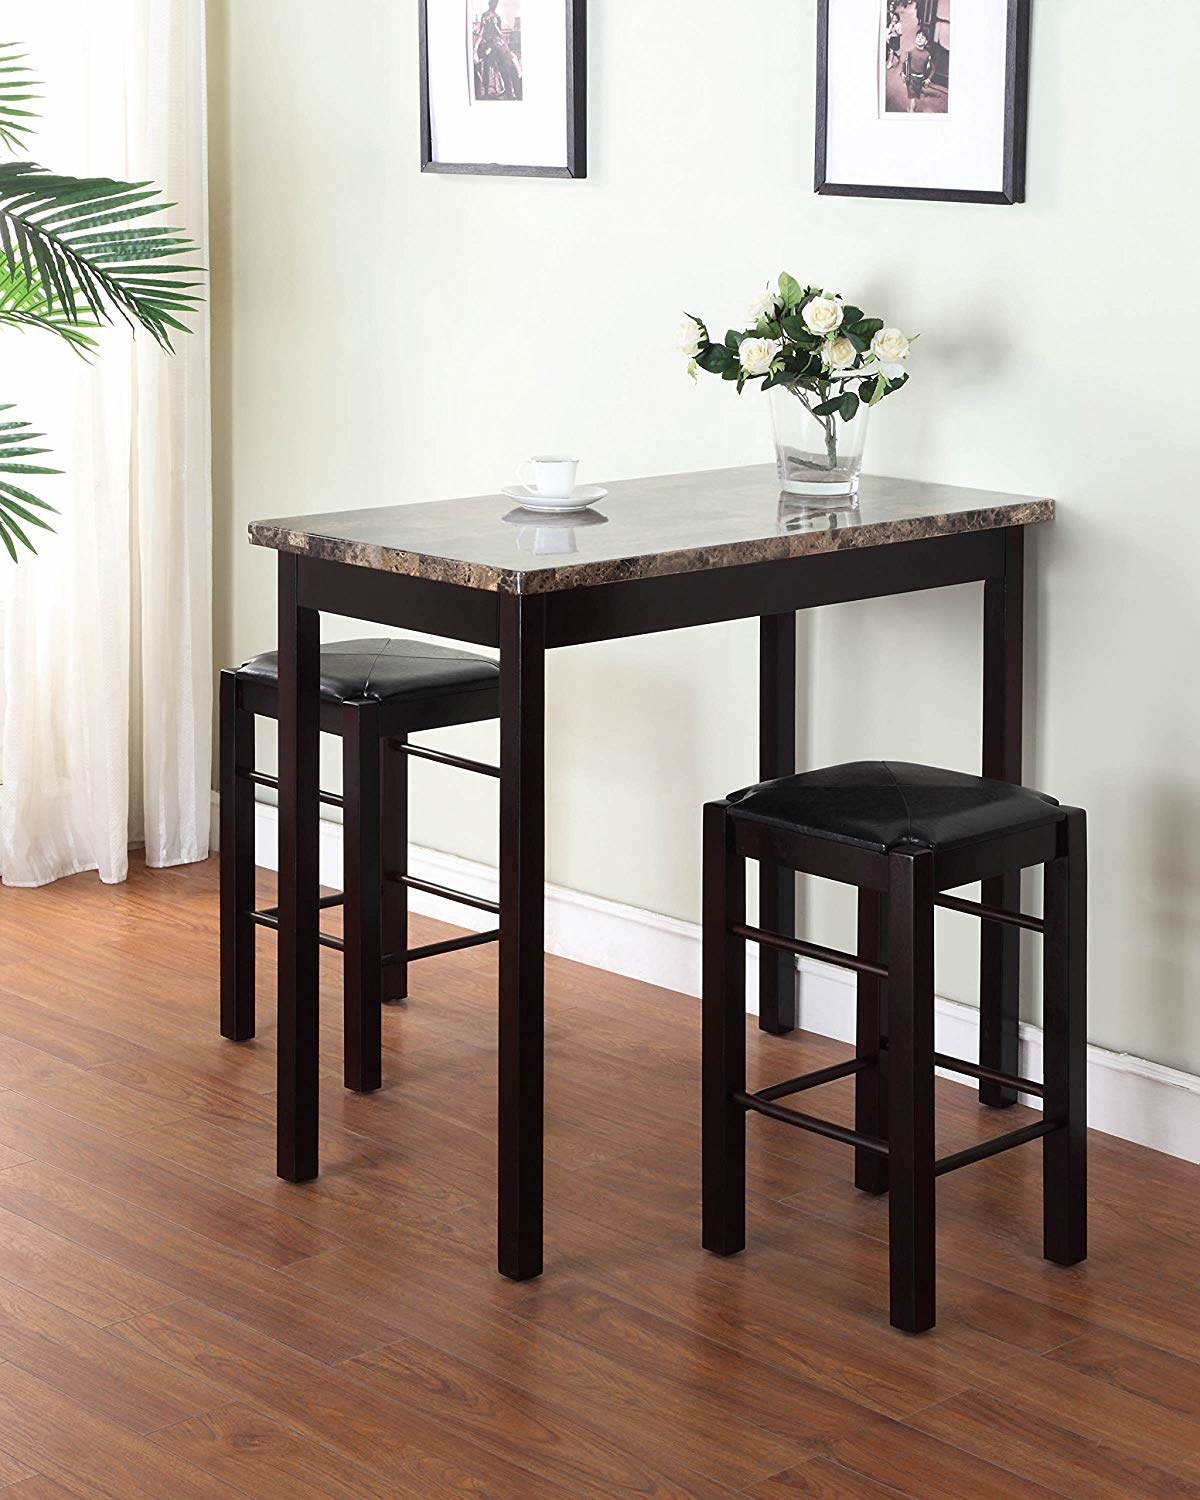 A tall table in brown with a marble-like top and two stools on either side of it, also in brown